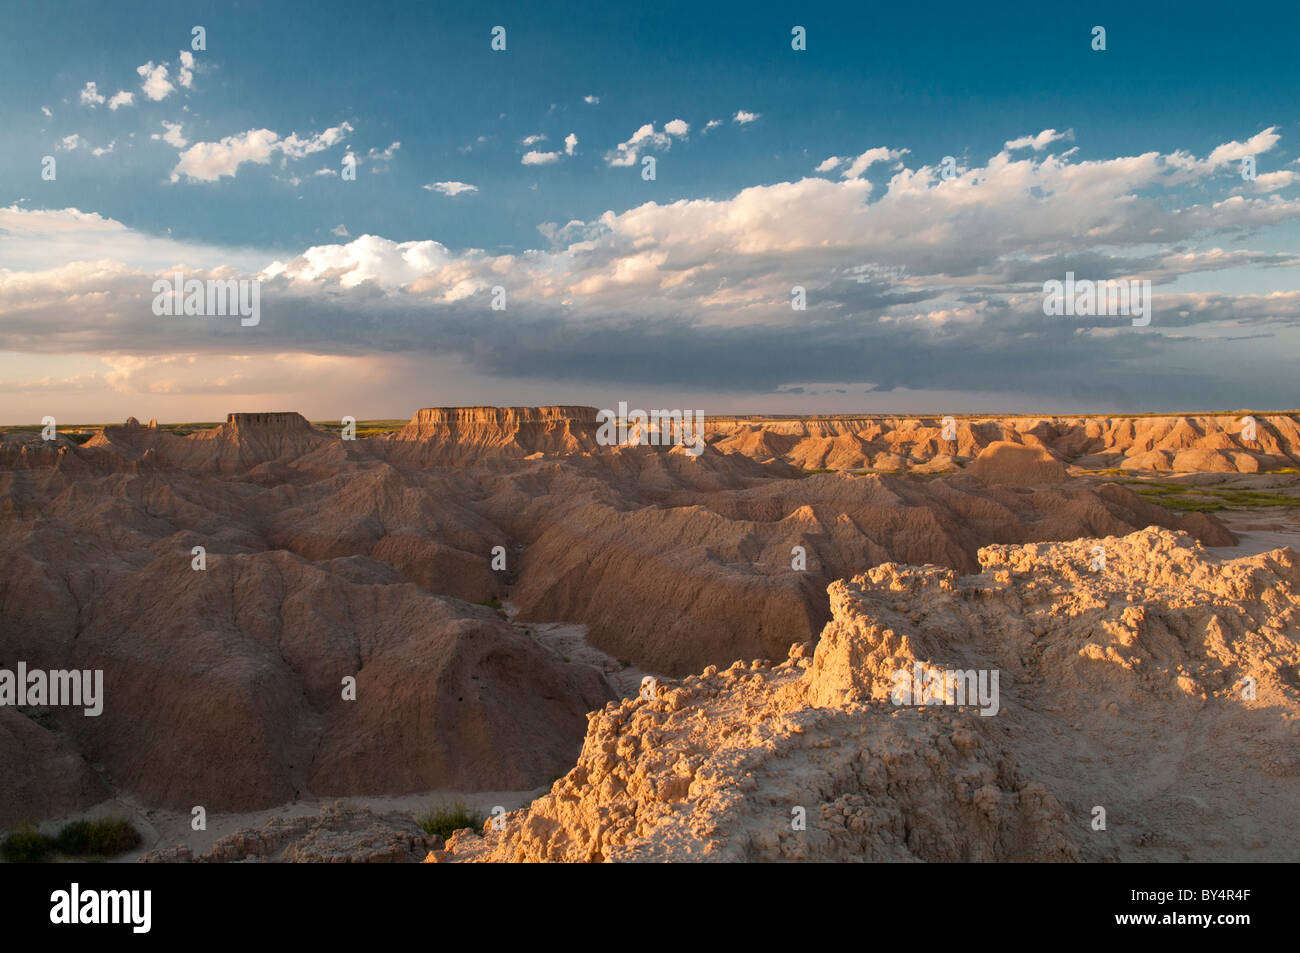 A storm rolls in over the plateaus of Badlands National Park at dusk Stock Photo